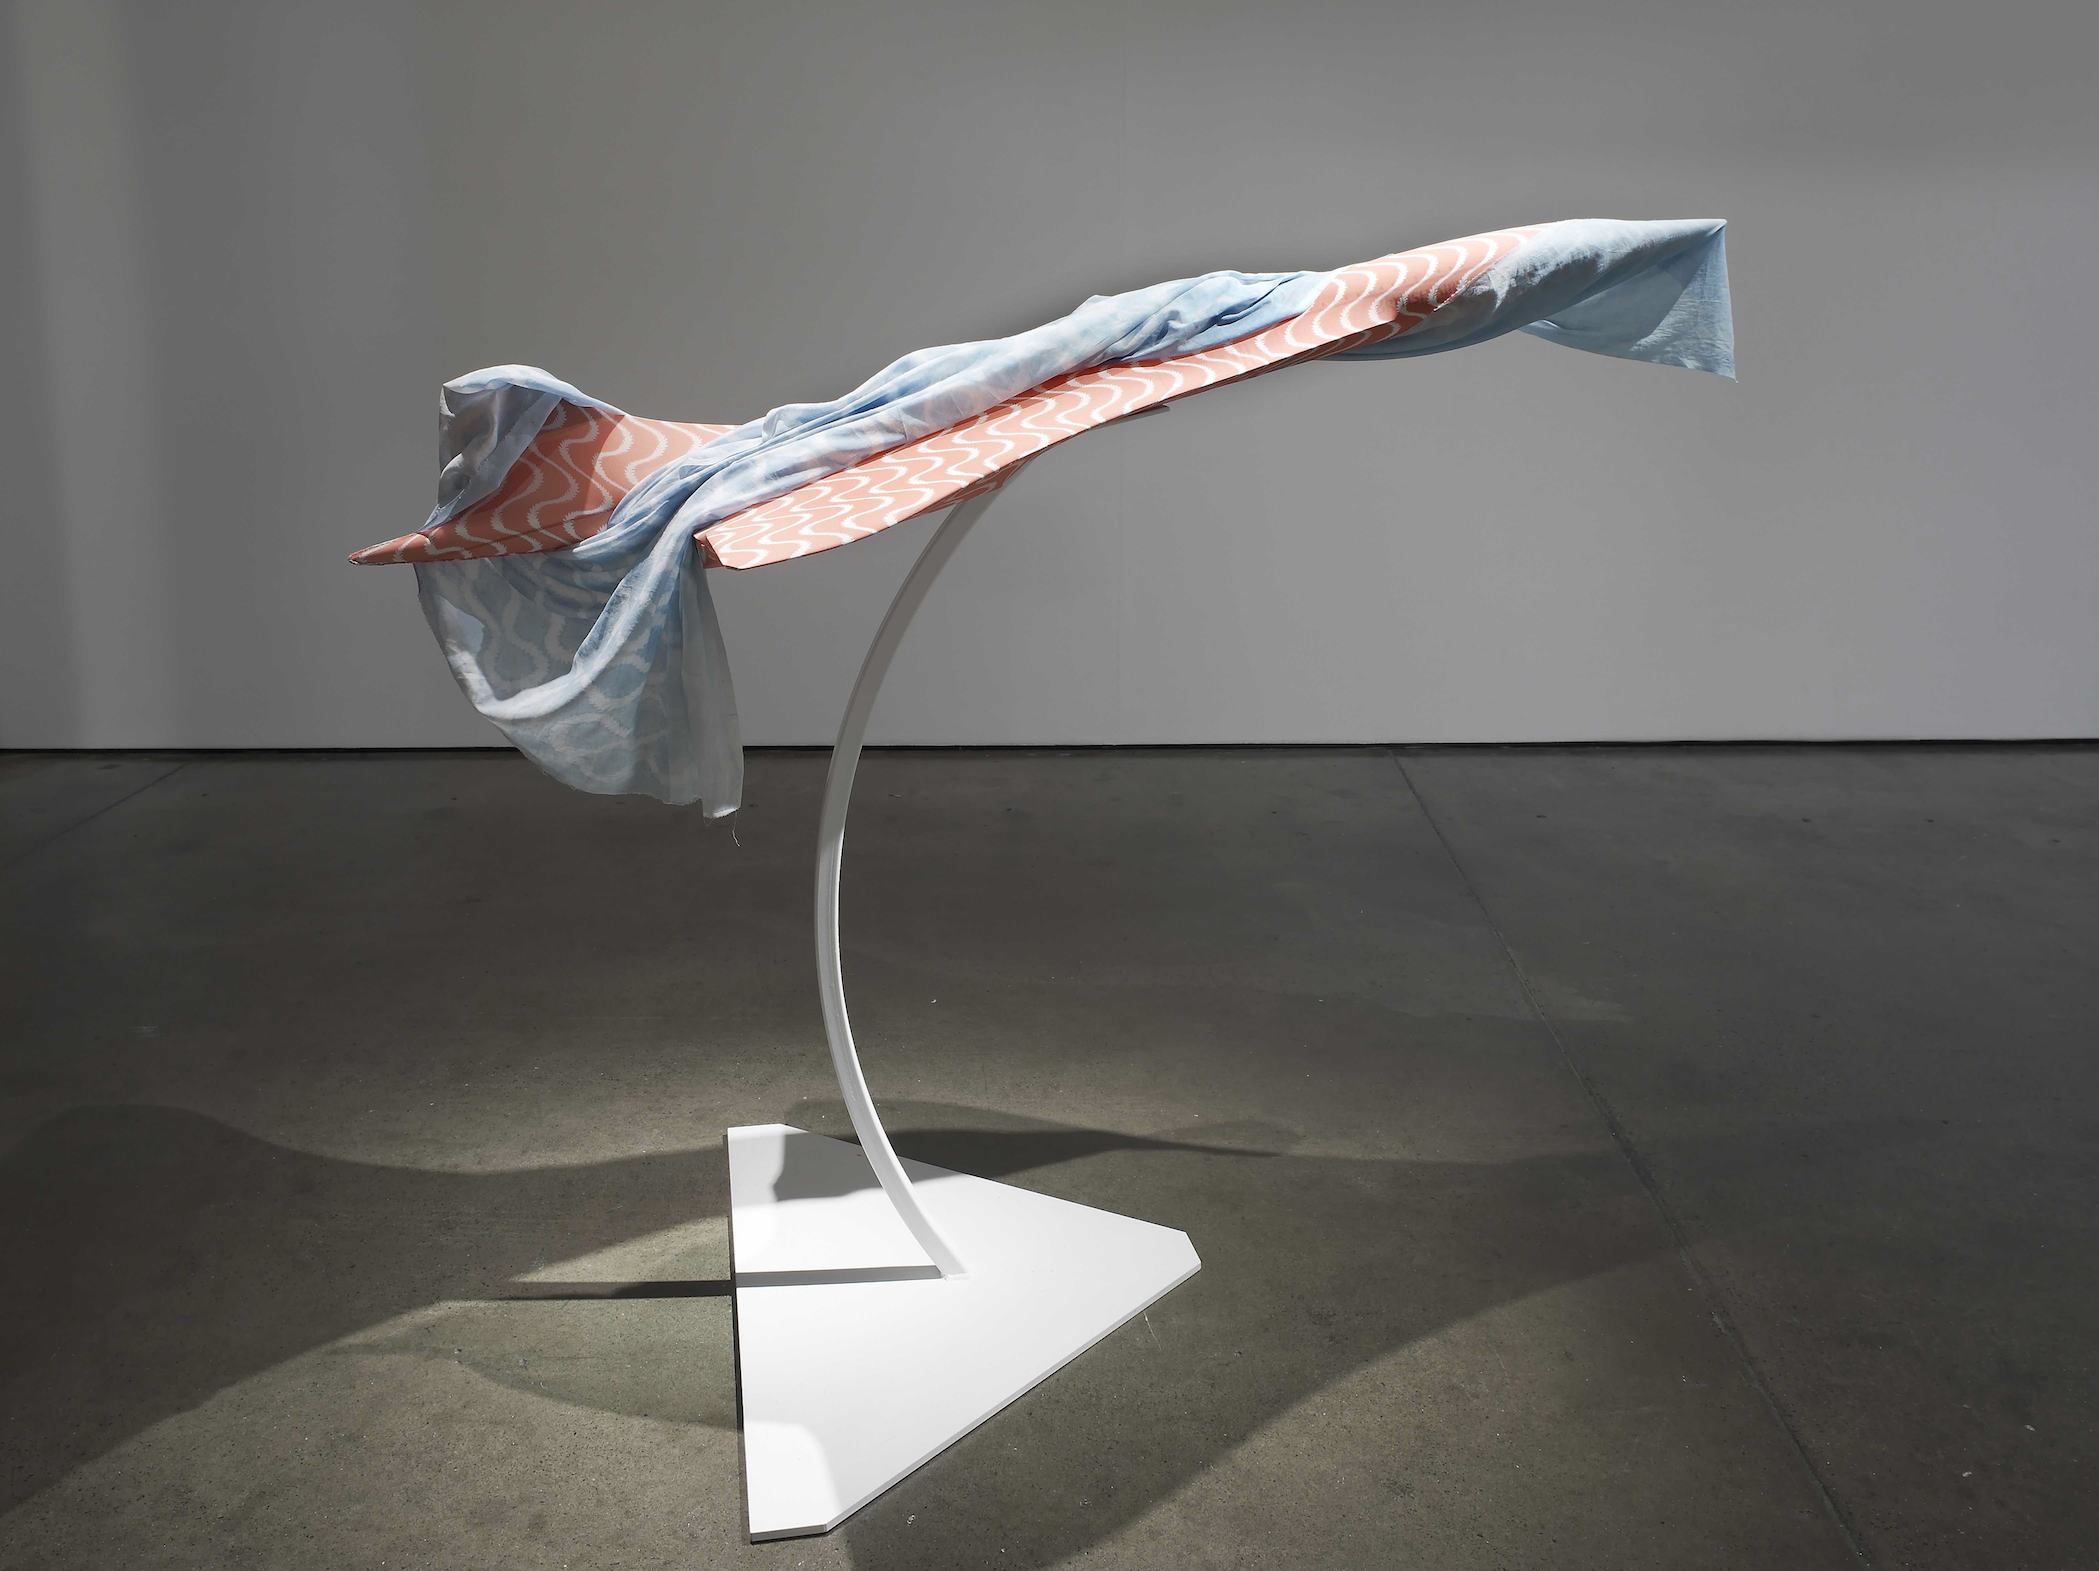      White Elephant (Pirate)   2010   Fabric, scale model airplane, stand   134 x 172 x 78.7 cm / 53 x 68 x 31 in  